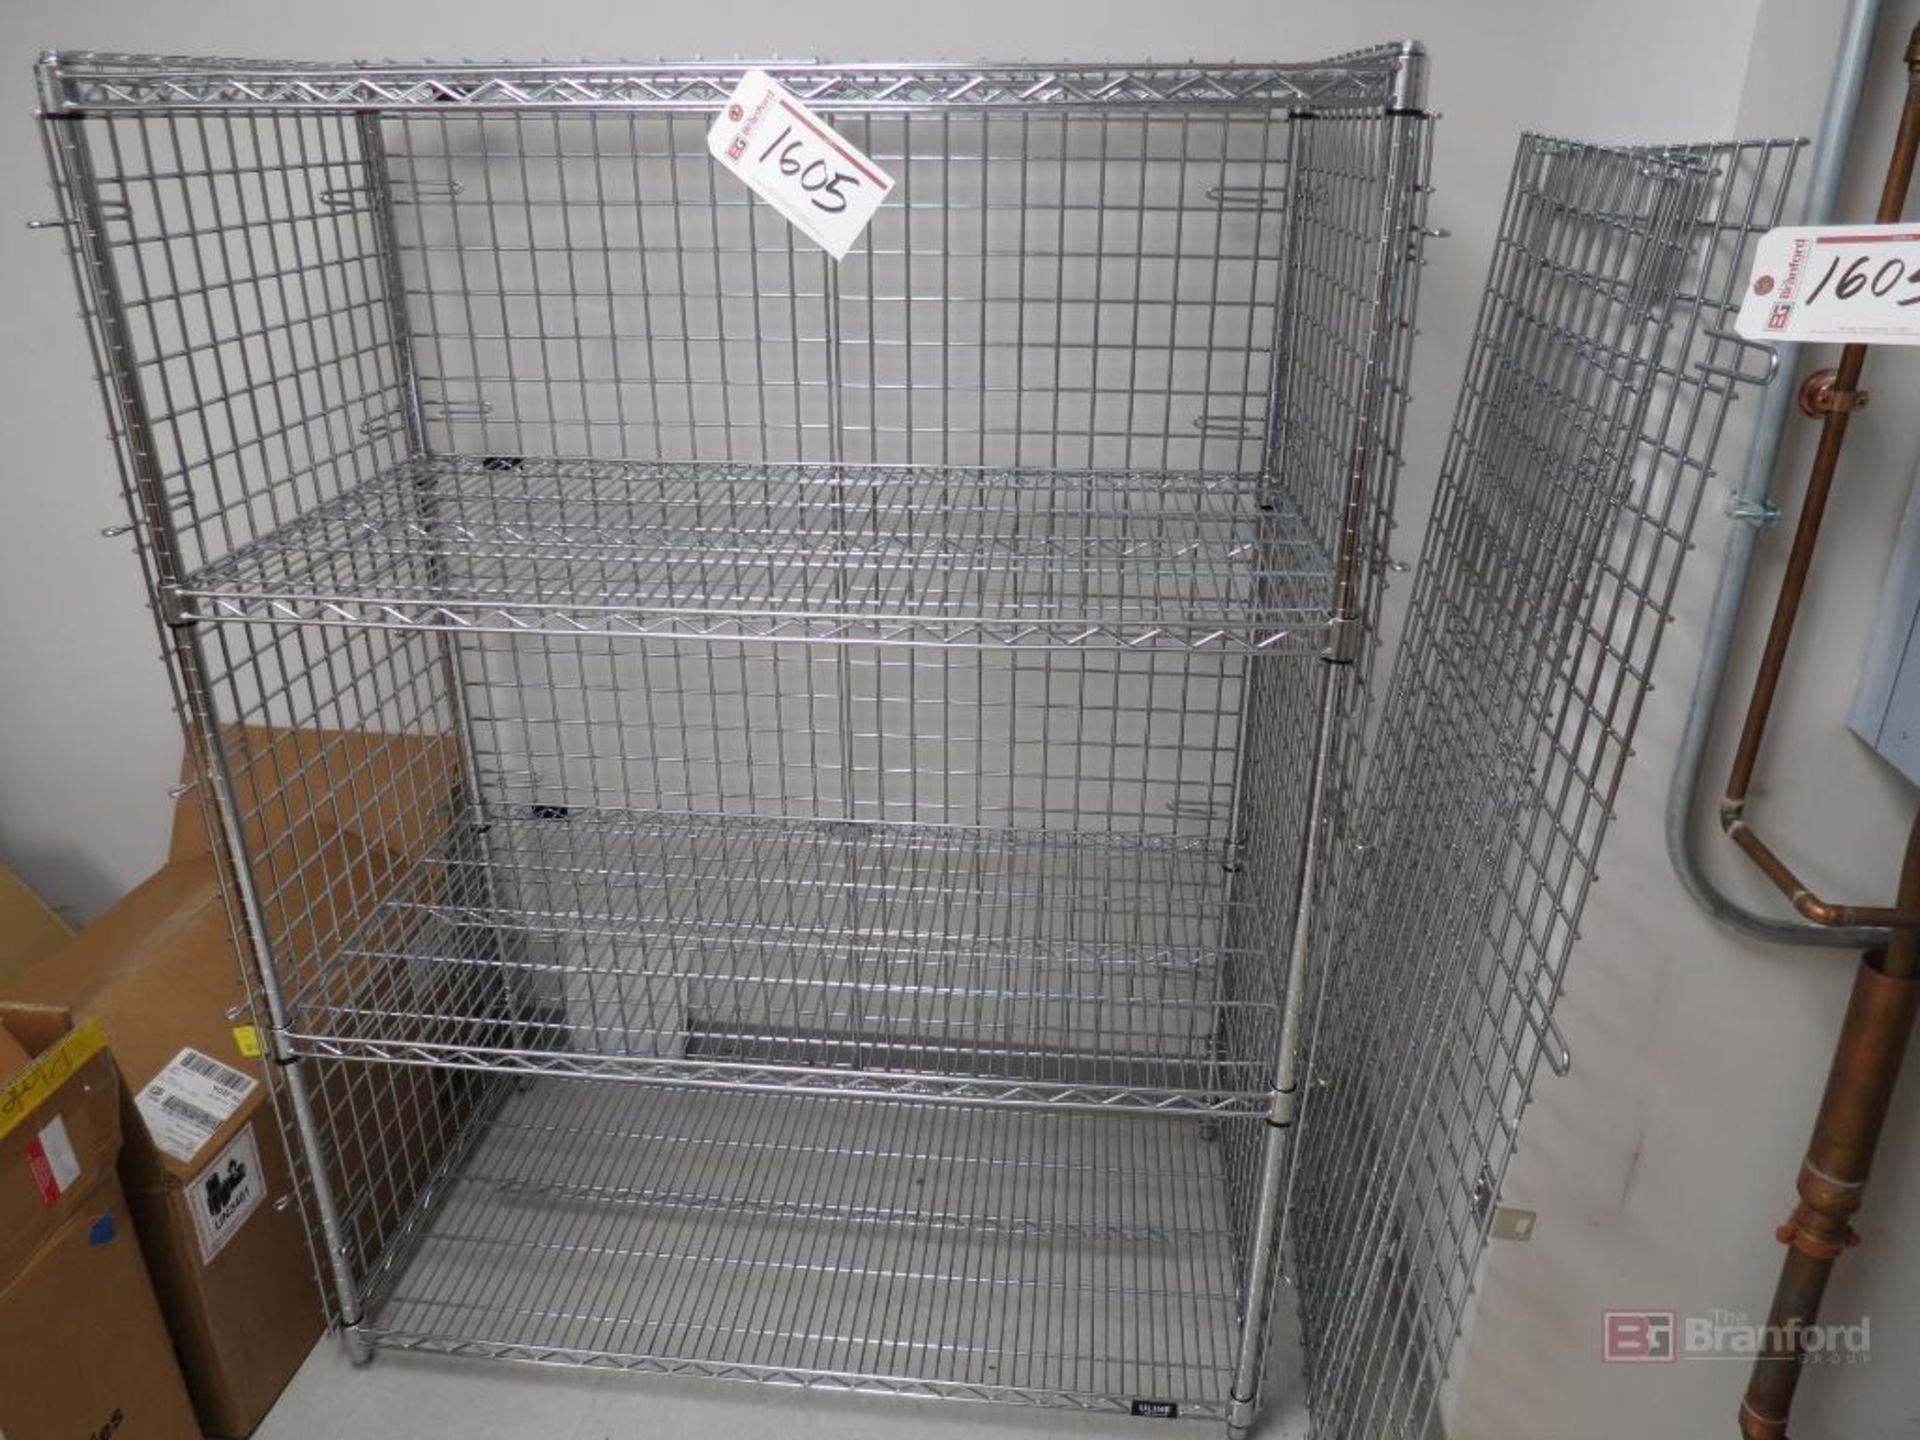 Chrome Wire Rack with Cage Doors - Image 2 of 2